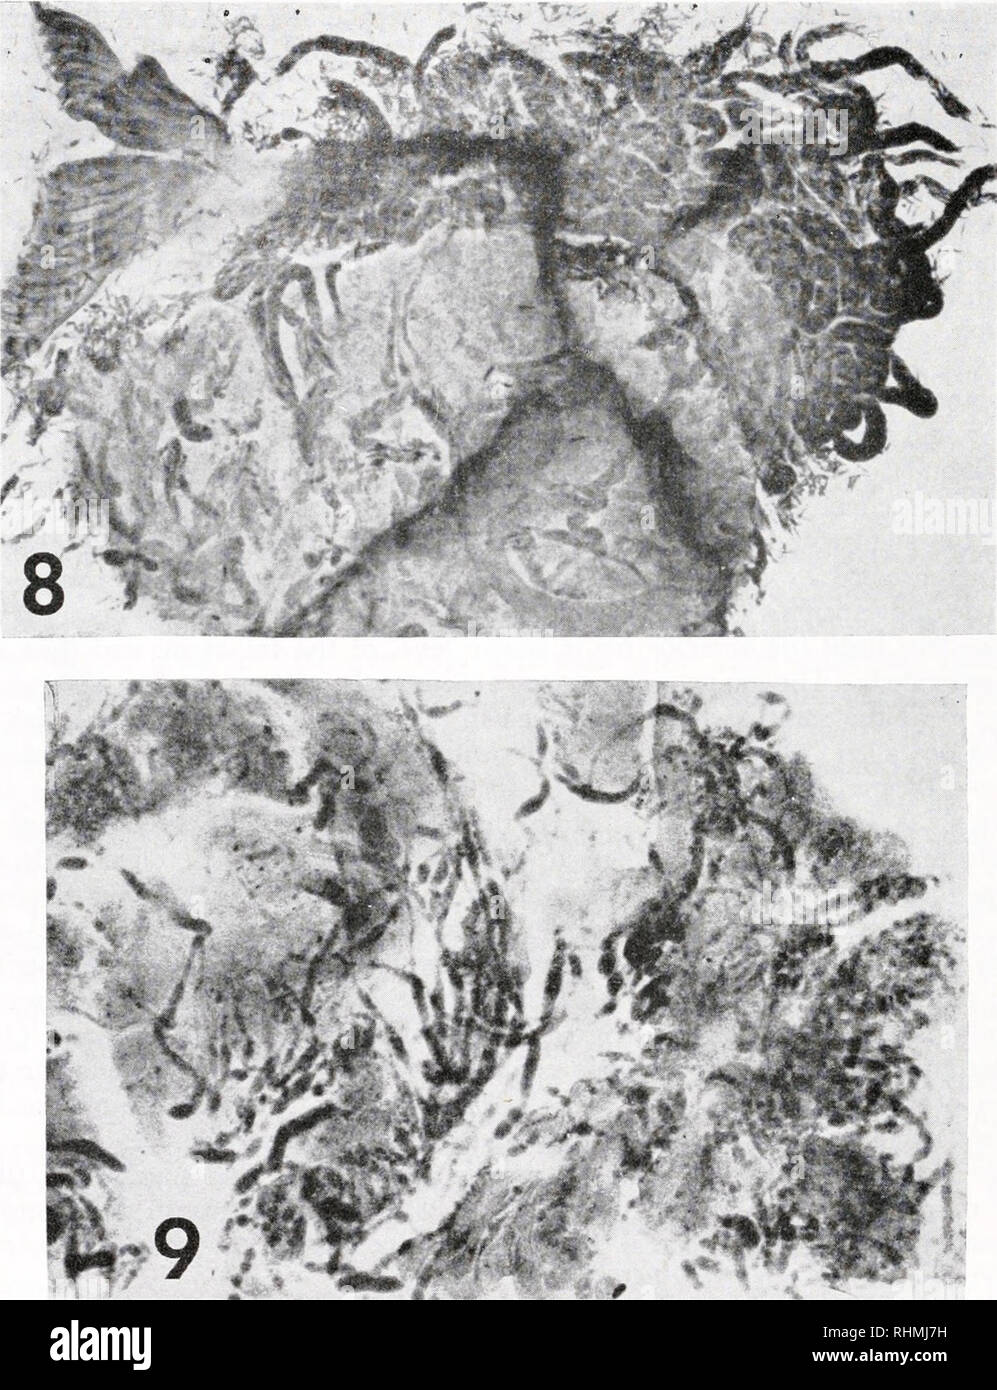 . The Biological bulletin. Biology; Zoology; Biology; Marine Biology. [06 HORACE Y. STUNKARD. FIGURE 8. Pressed preparation of the tissues of the clam, Lyonsia hyalina, infiltrated with branching sporocysts of Rhipidocotyle sp. FIGURE 9. Smear preparation of the tissues of the clam, Lyonsia hyalina, infiltrated with branching sporocysts of Rhipidocotyle sp. TAXONOMY The trematode family Bucephalidae Prosorhynchoides gracilescens nczv combination: validation of Prosorhynchoides iljus, 1929. Rudolphi (1819) described three species of bucephalid worms from ine fishes: Distoma gracilescens from L Stock Photo